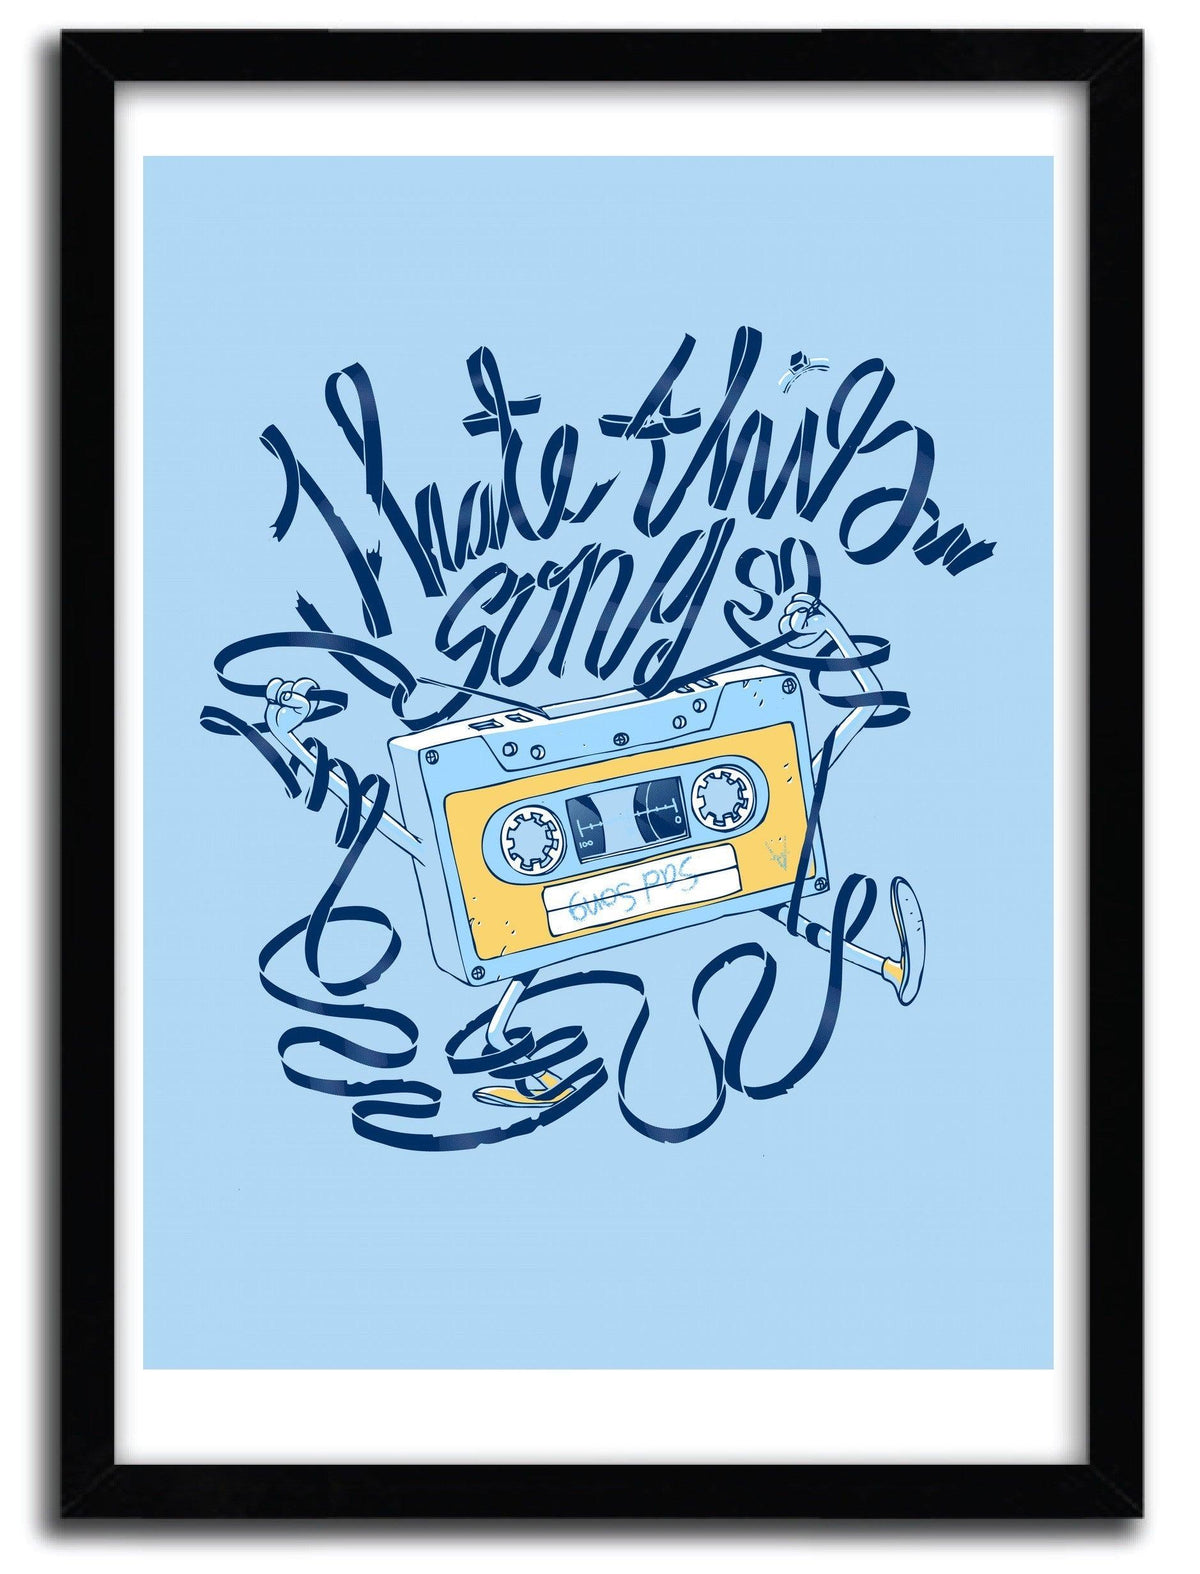 Affiche SAD SONG by CARBINE ArtAndToys